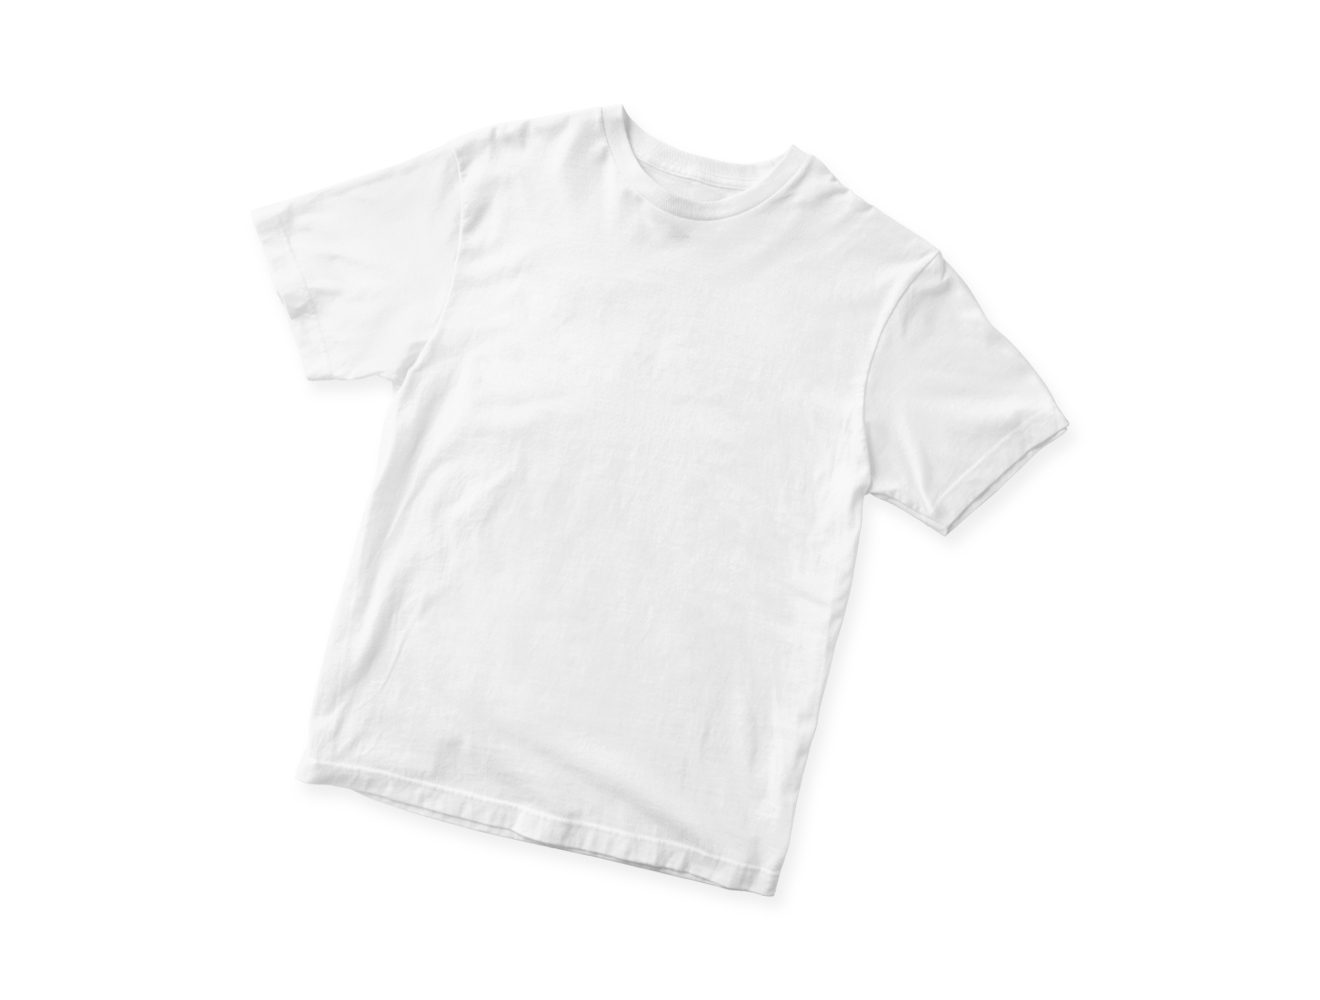 Sublimation T-Shirt for Adults size S - White